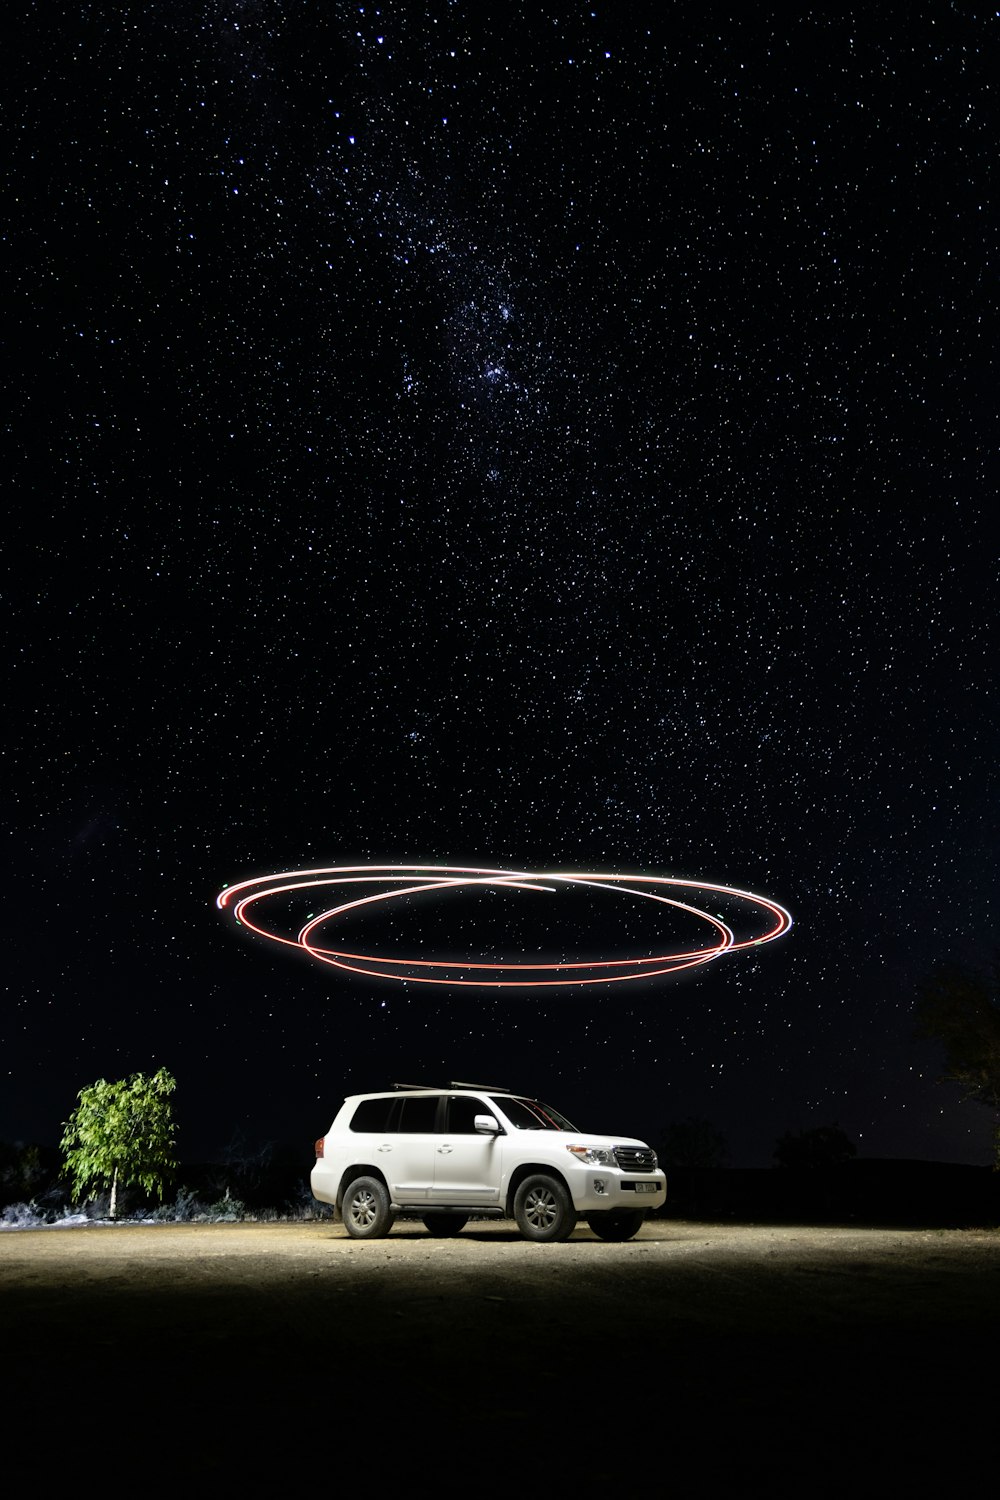 a car parked in front of a red circle in the sky